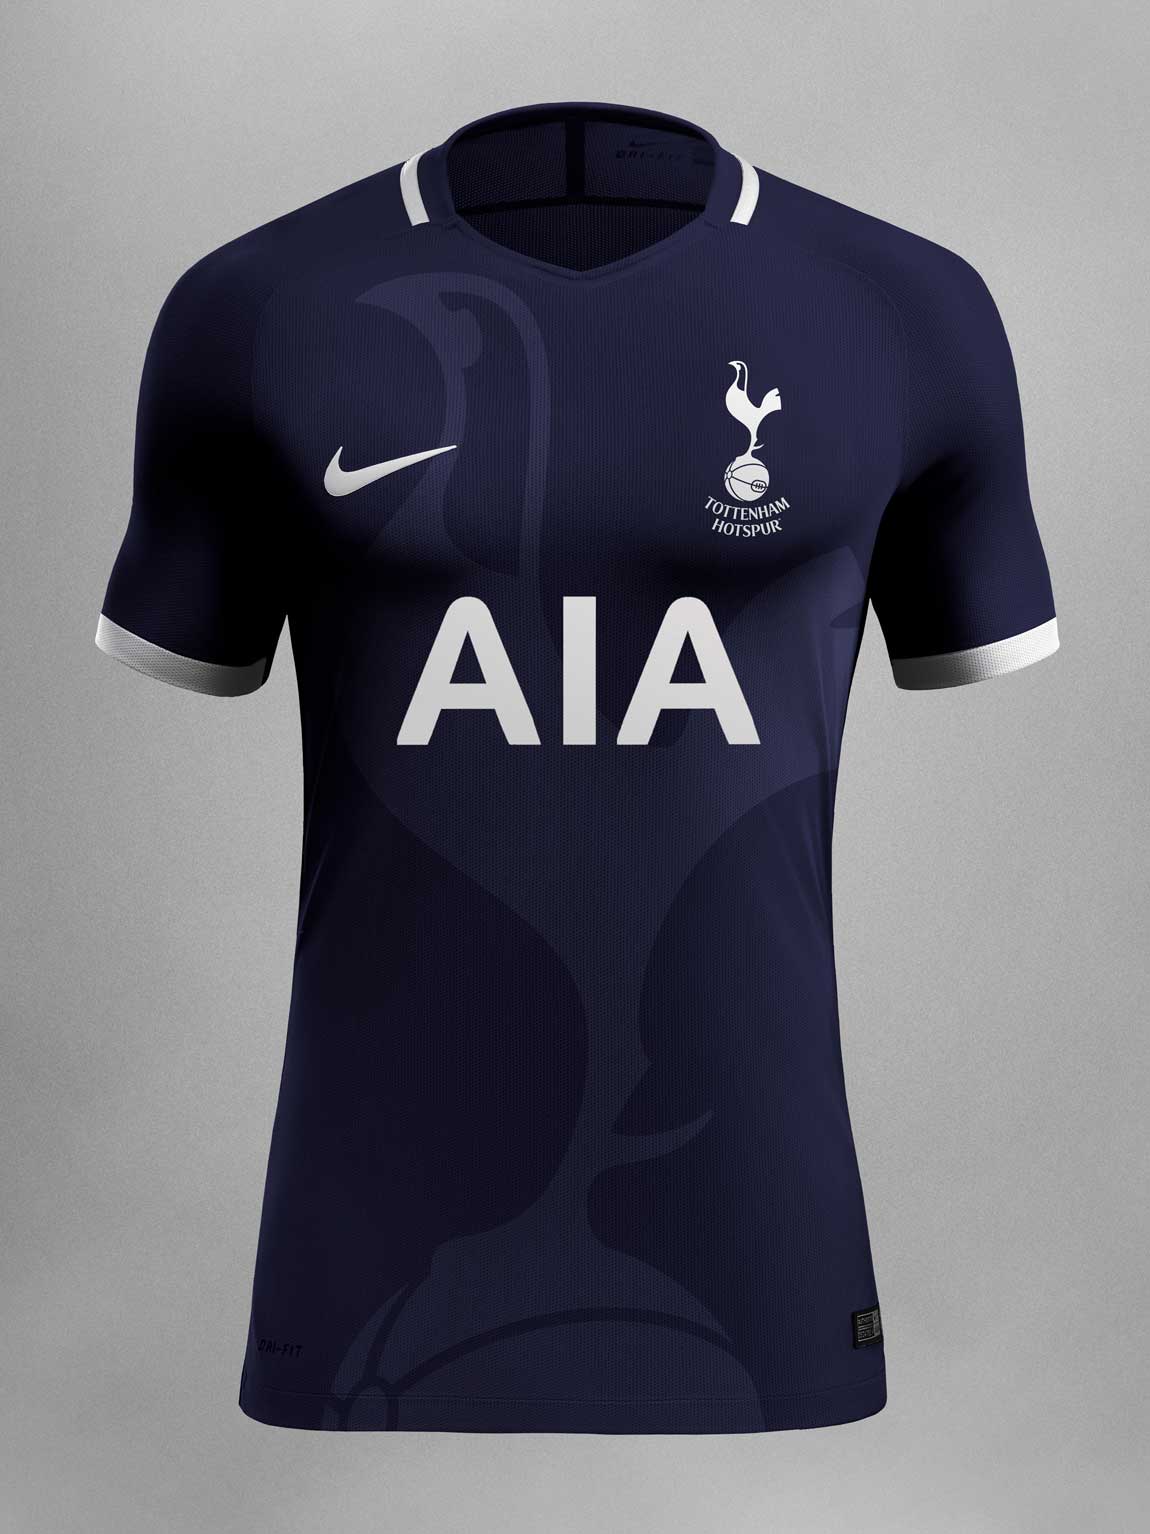 New Kit | Page 74 | The Fighting Cock - Tottenham Hotspur ...